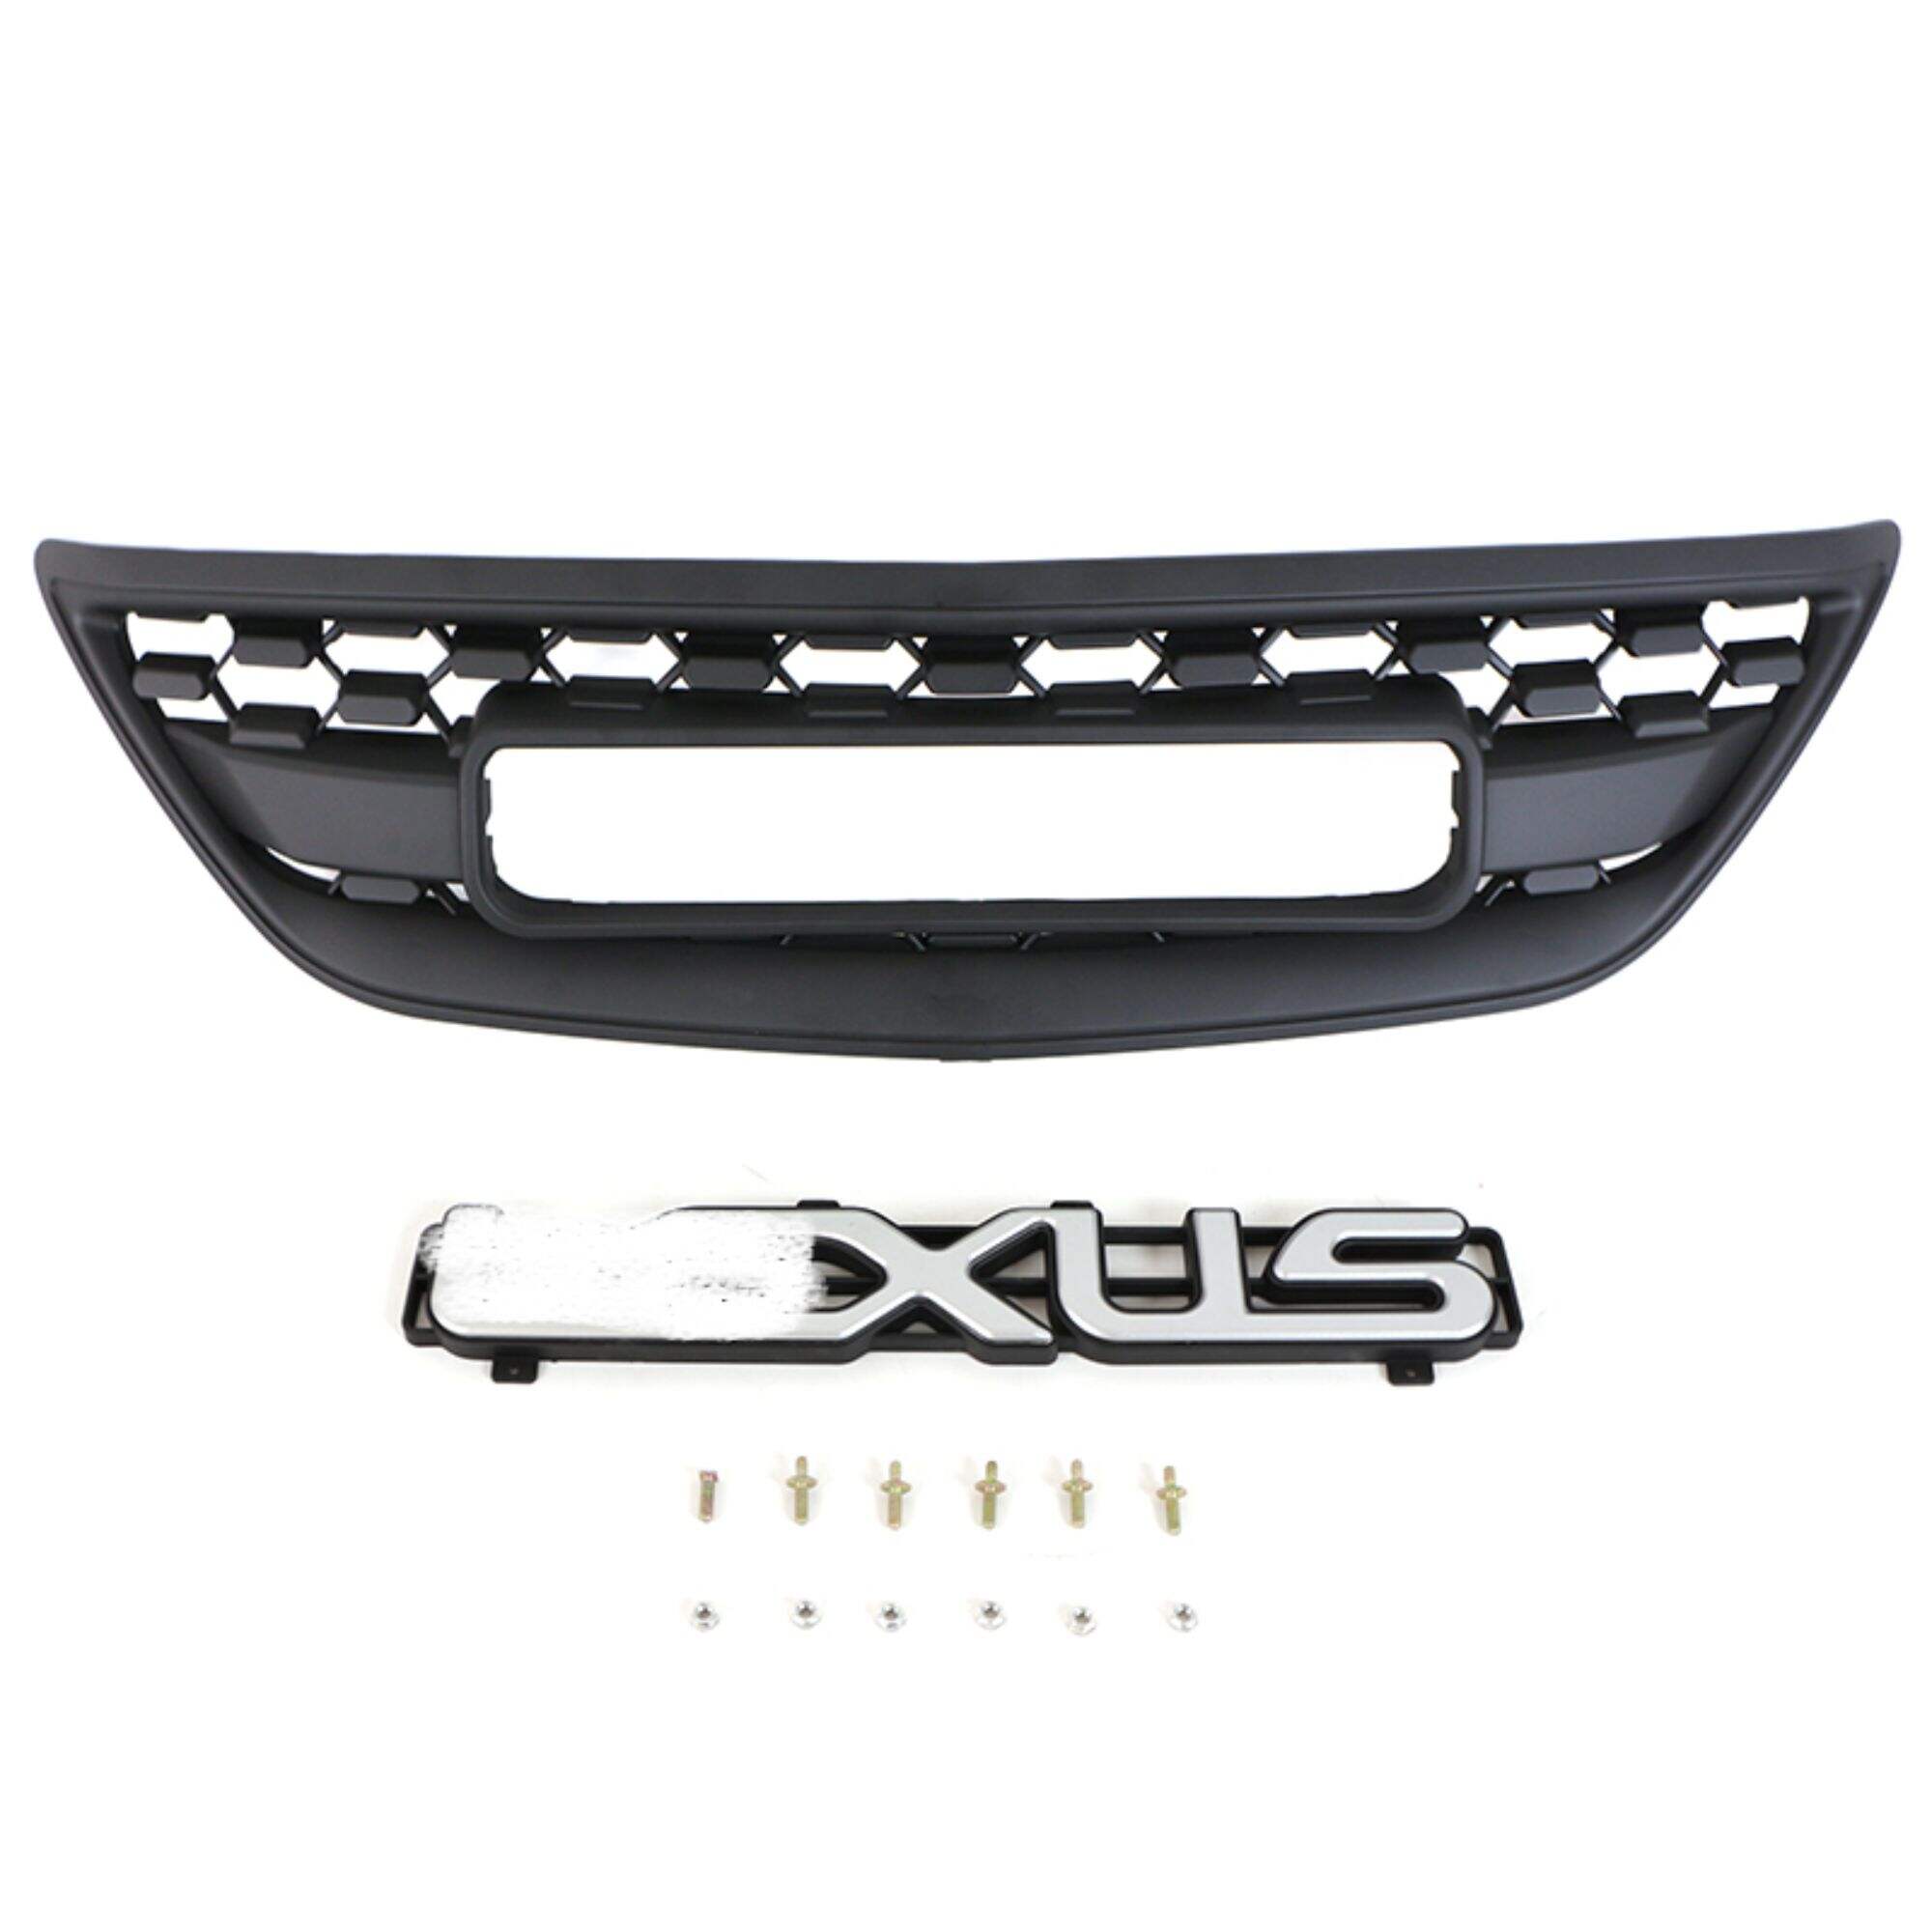 Front Grille With Light Fit For Lexus RX350 330 2006 2007 2008 2009